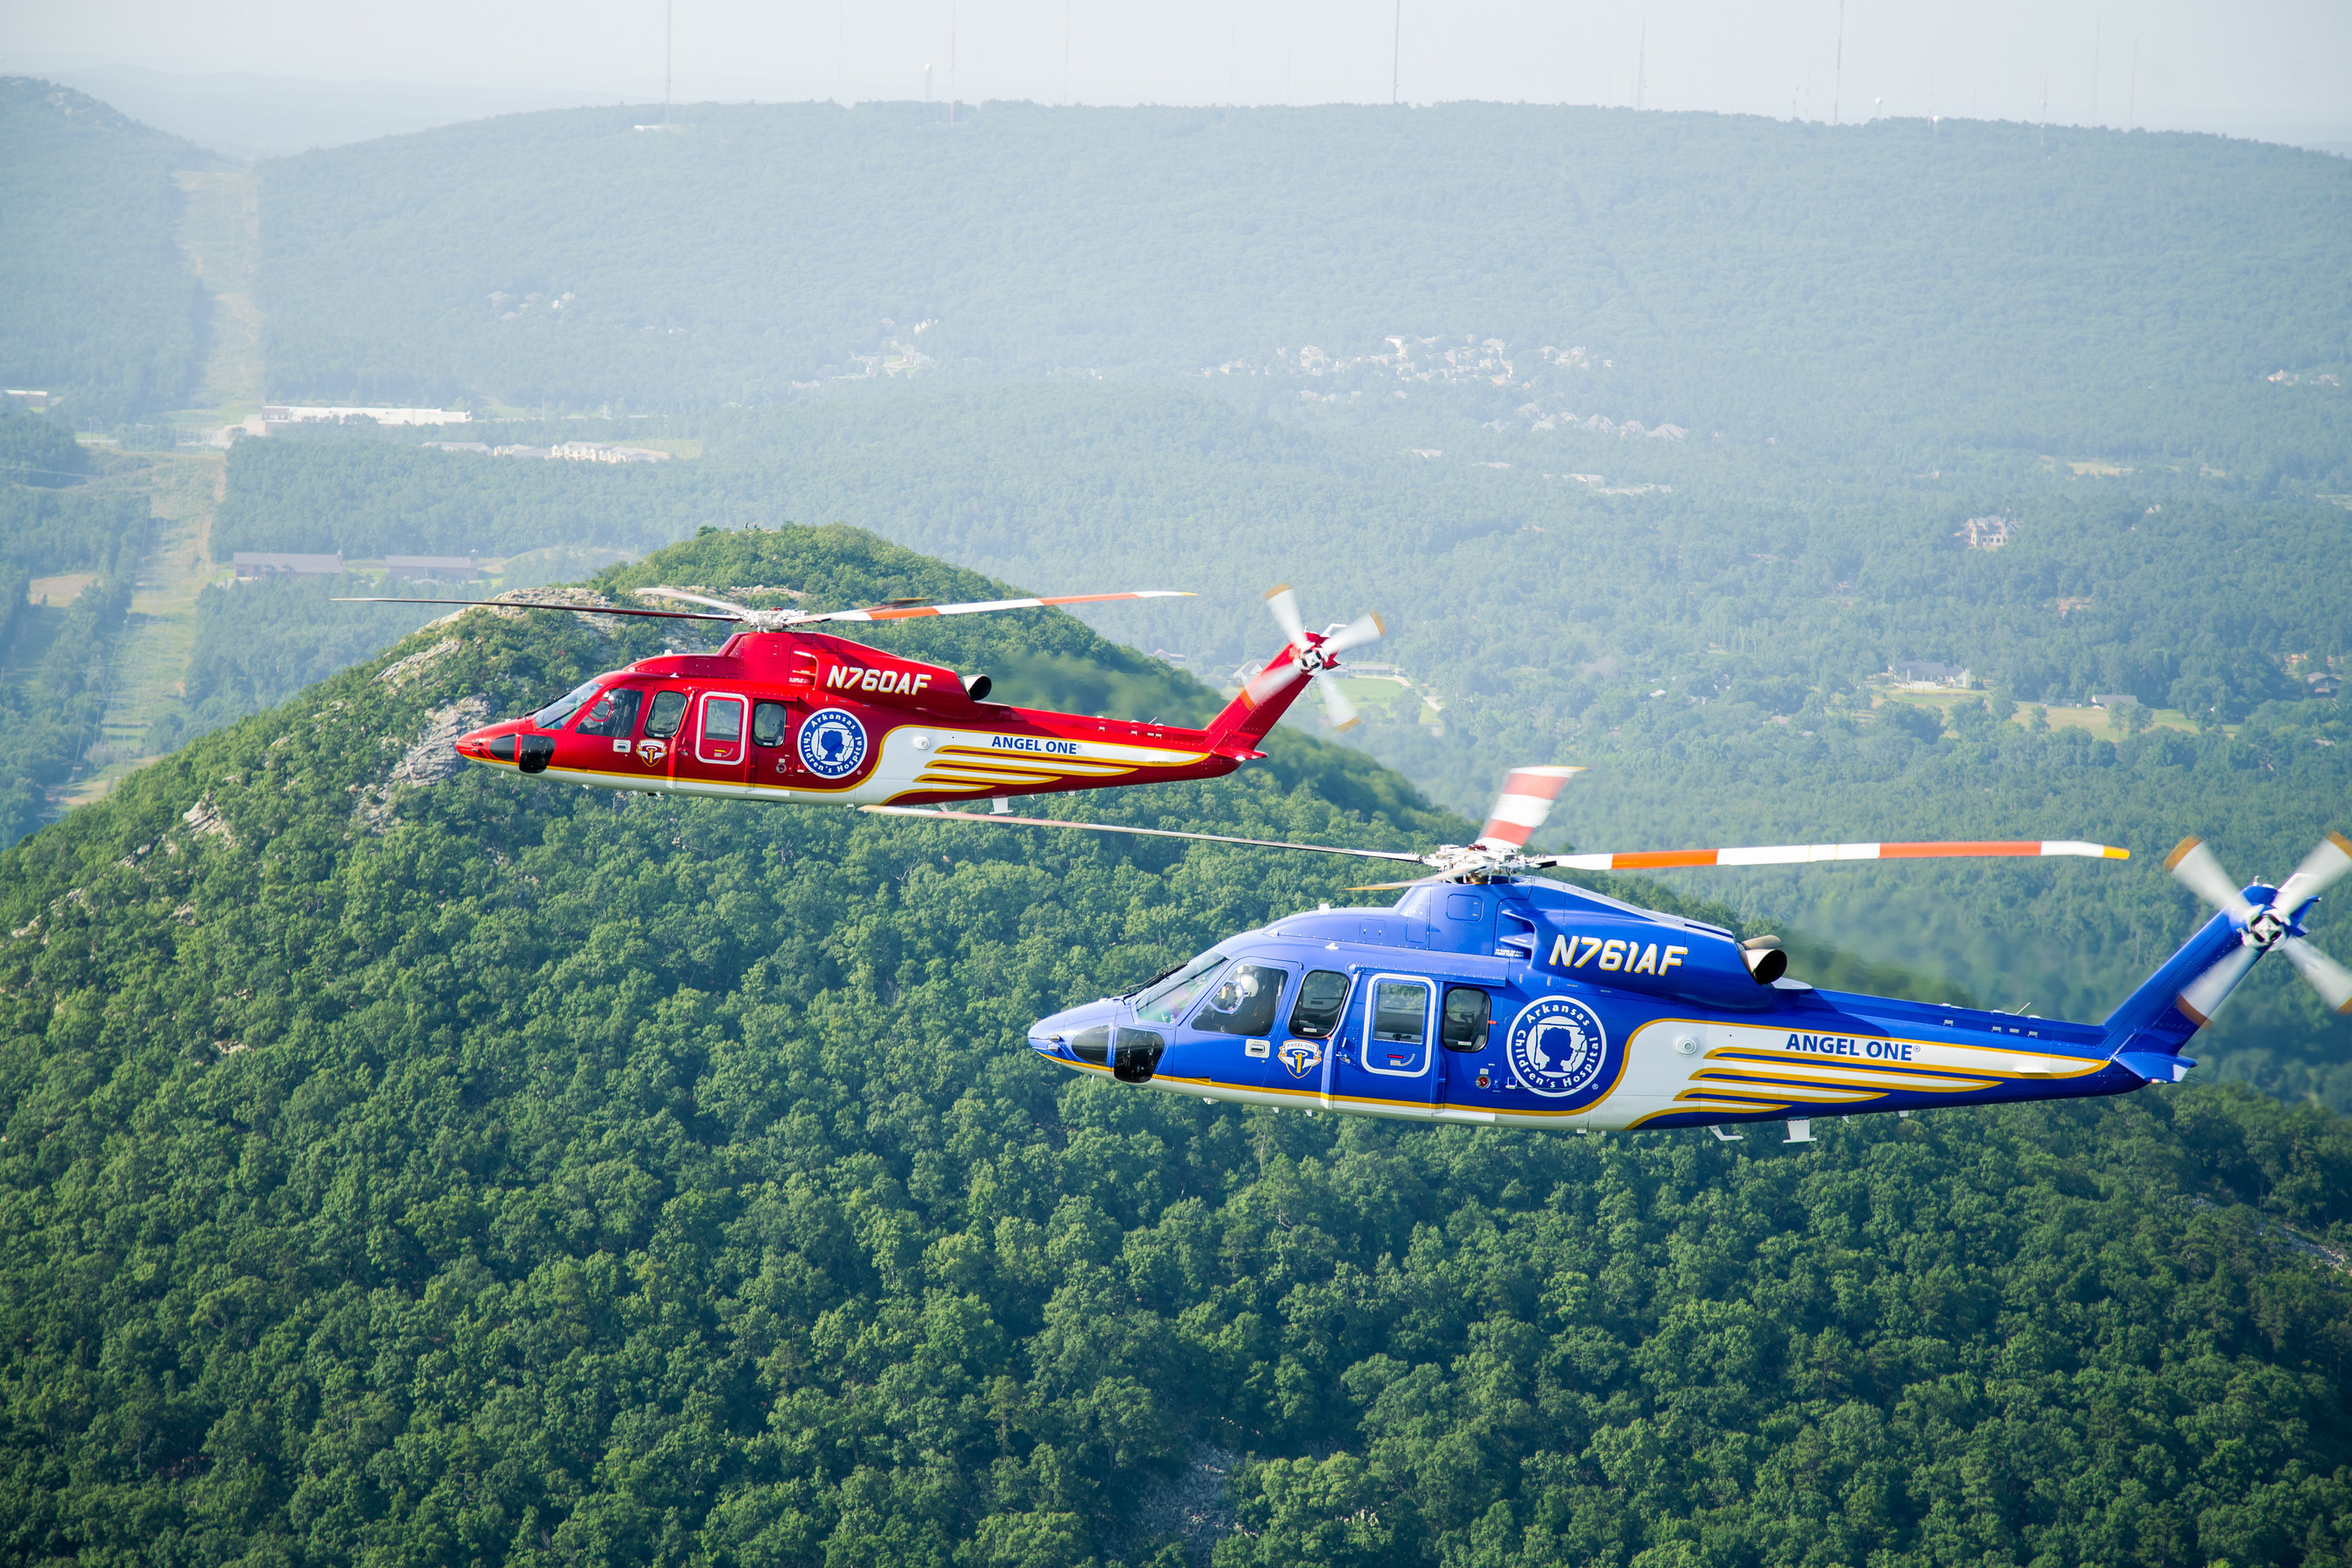 Sikorsky Aircraft Corp. announced today that it has delivered two S-76D(TM) helicopters for air medical transportation to Arkansas Children's Hospital.  Sikorsky has now completed S-76D deliveries into all mission segments.Photo Courtesy of Arkansas Children's Hospital